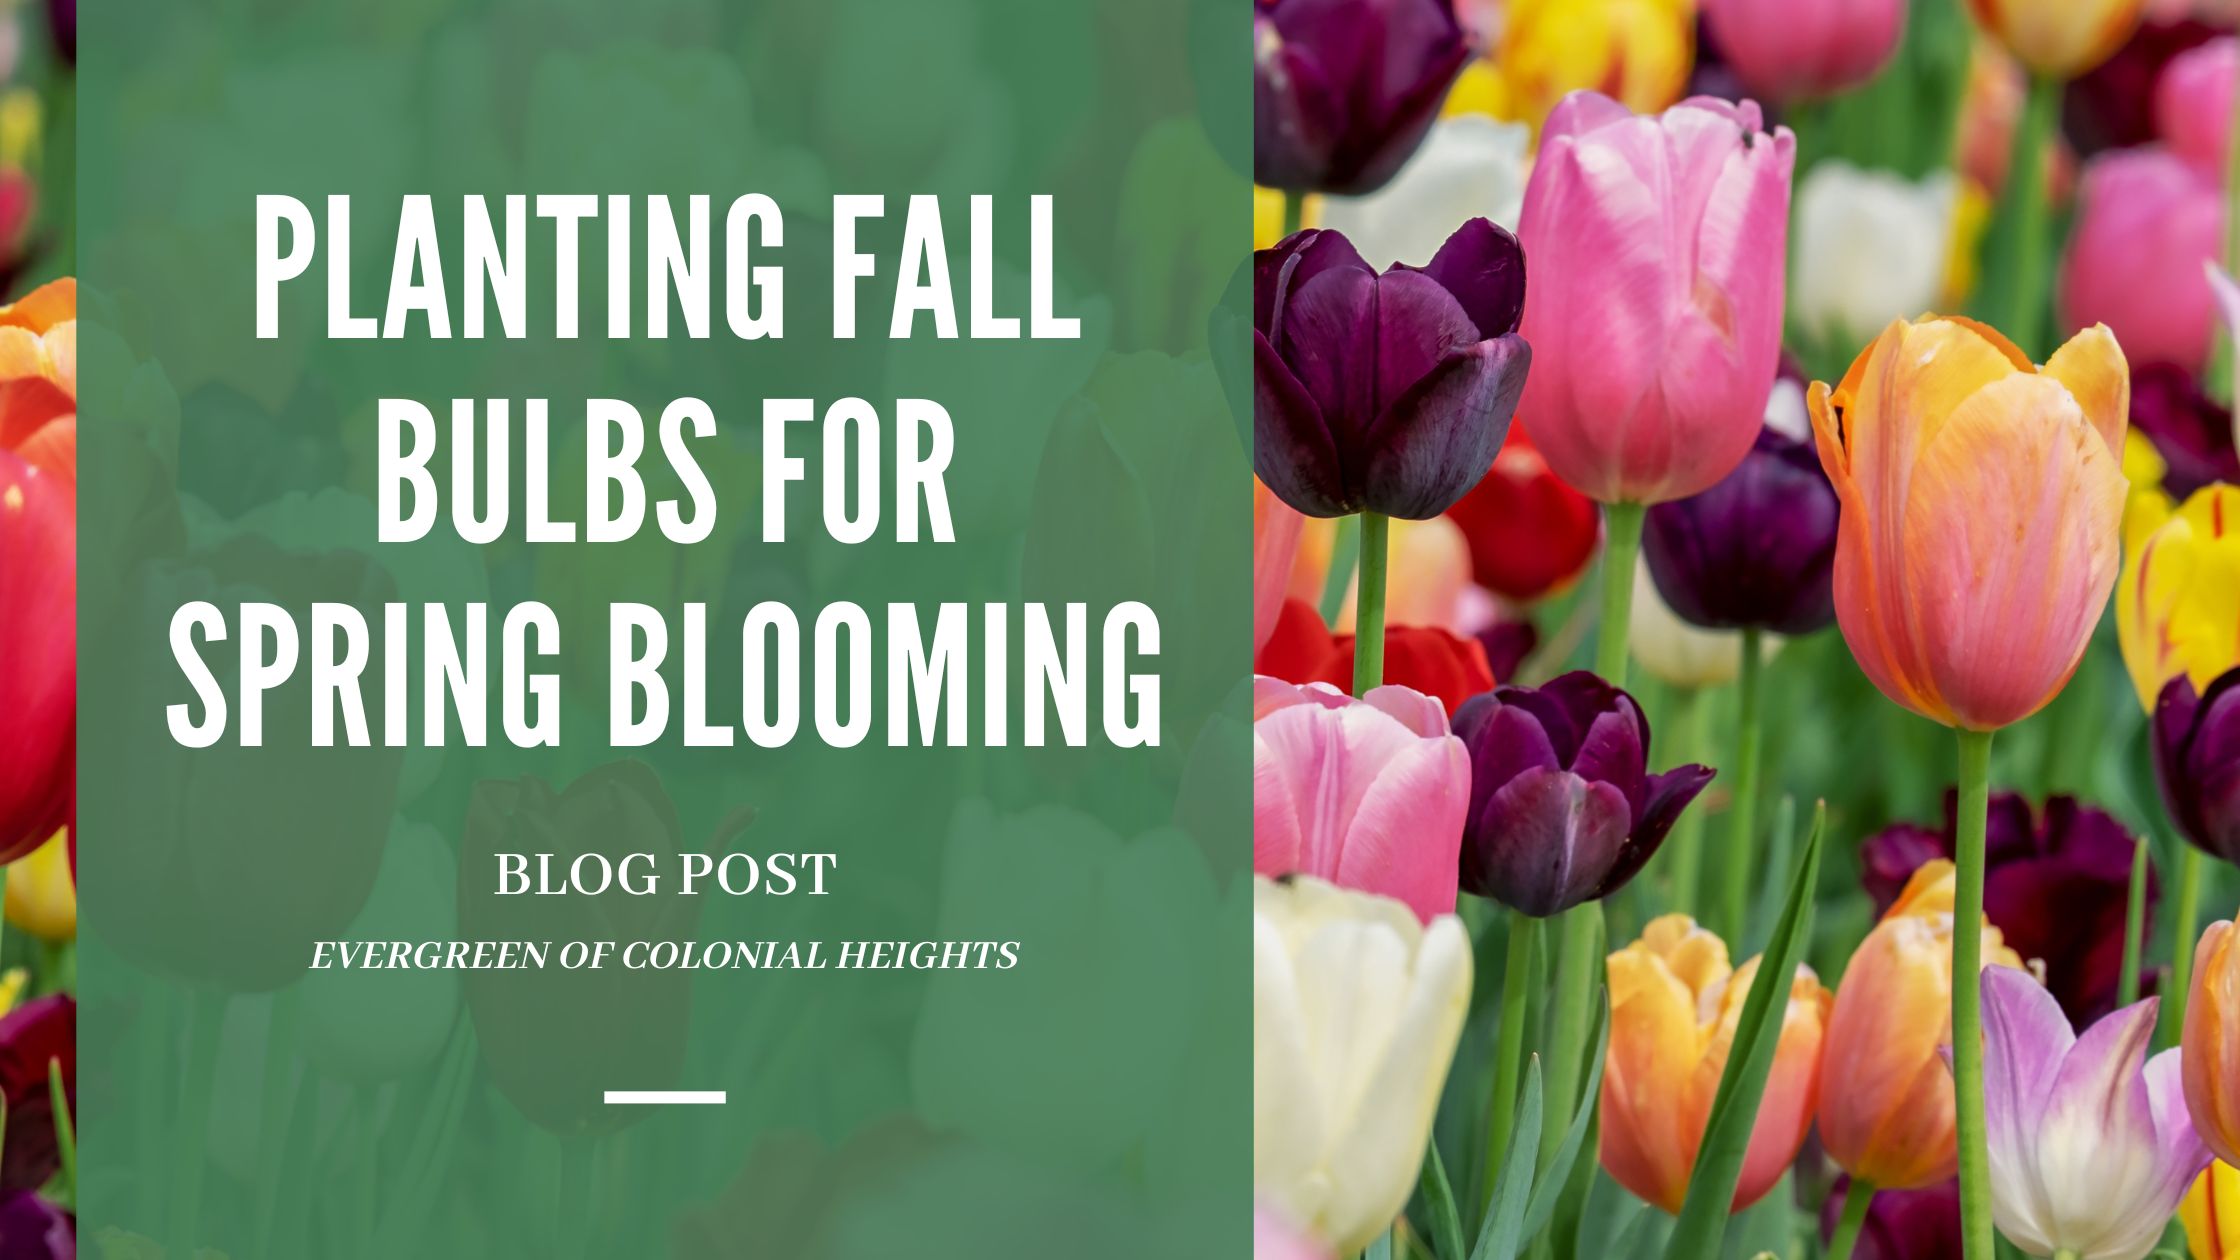 Planting Fall Bulbs for Spring Blooming